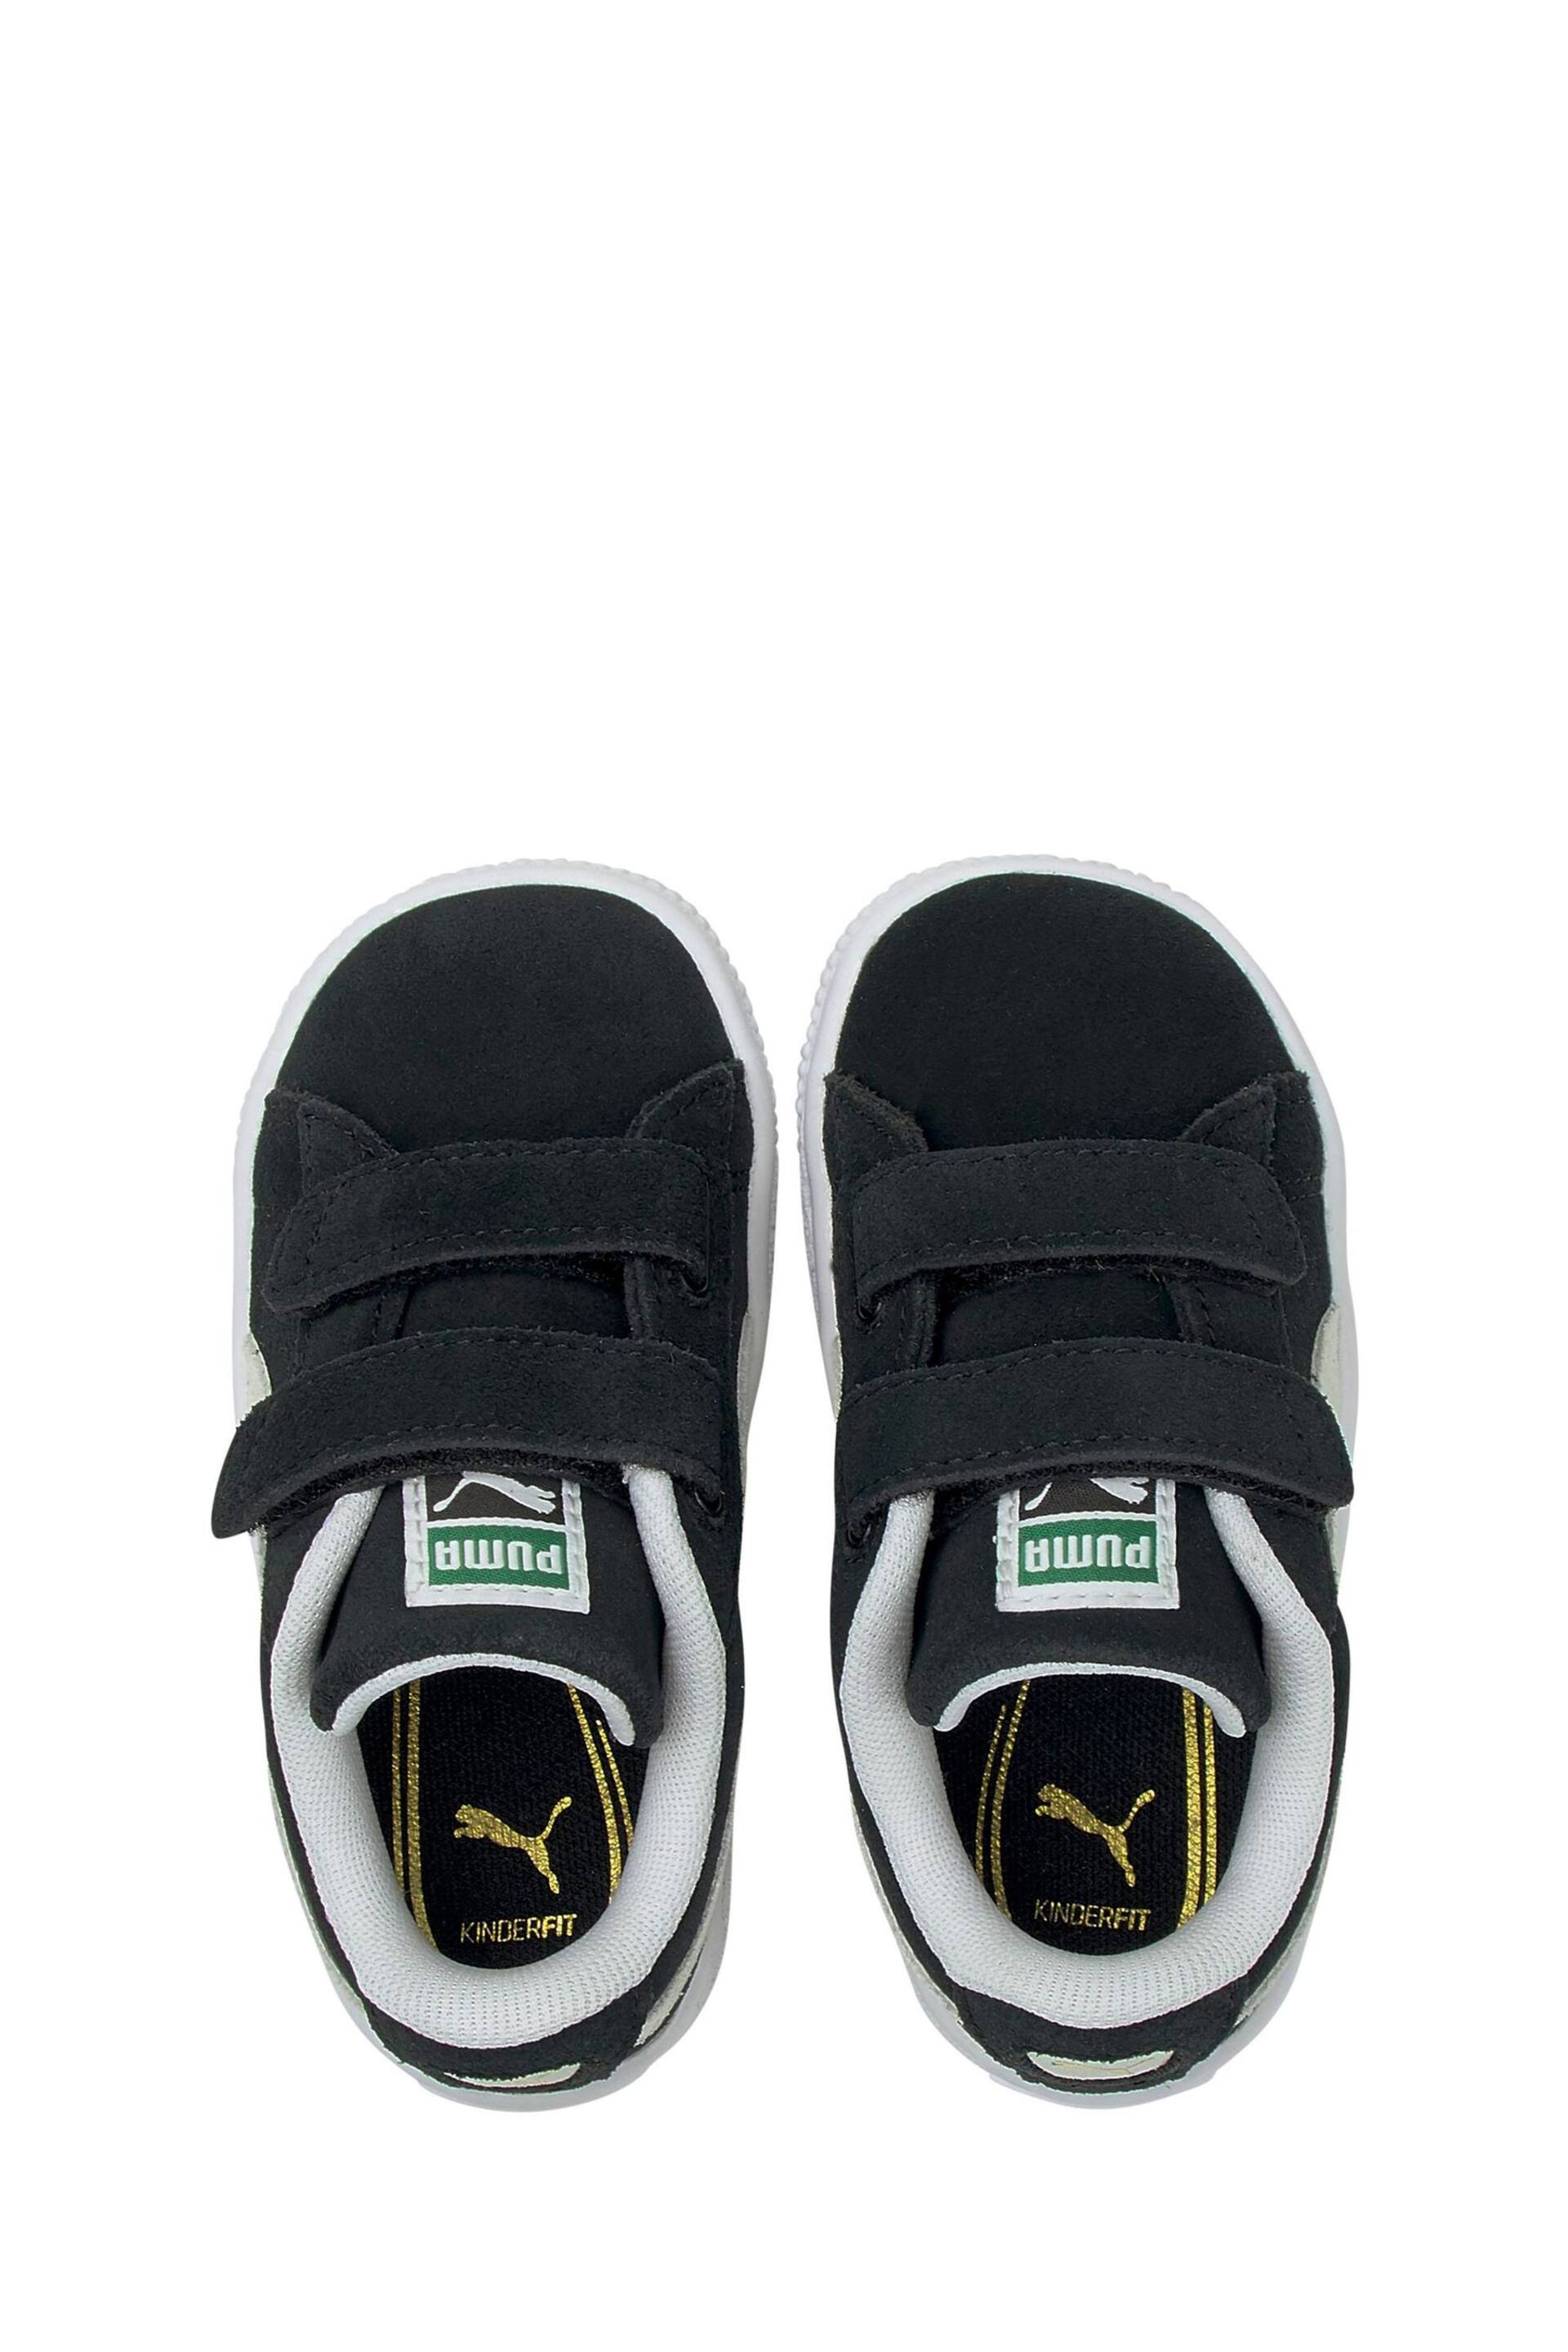 Puma Black Babies Suede Classic XXI Trainers - Image 3 of 11